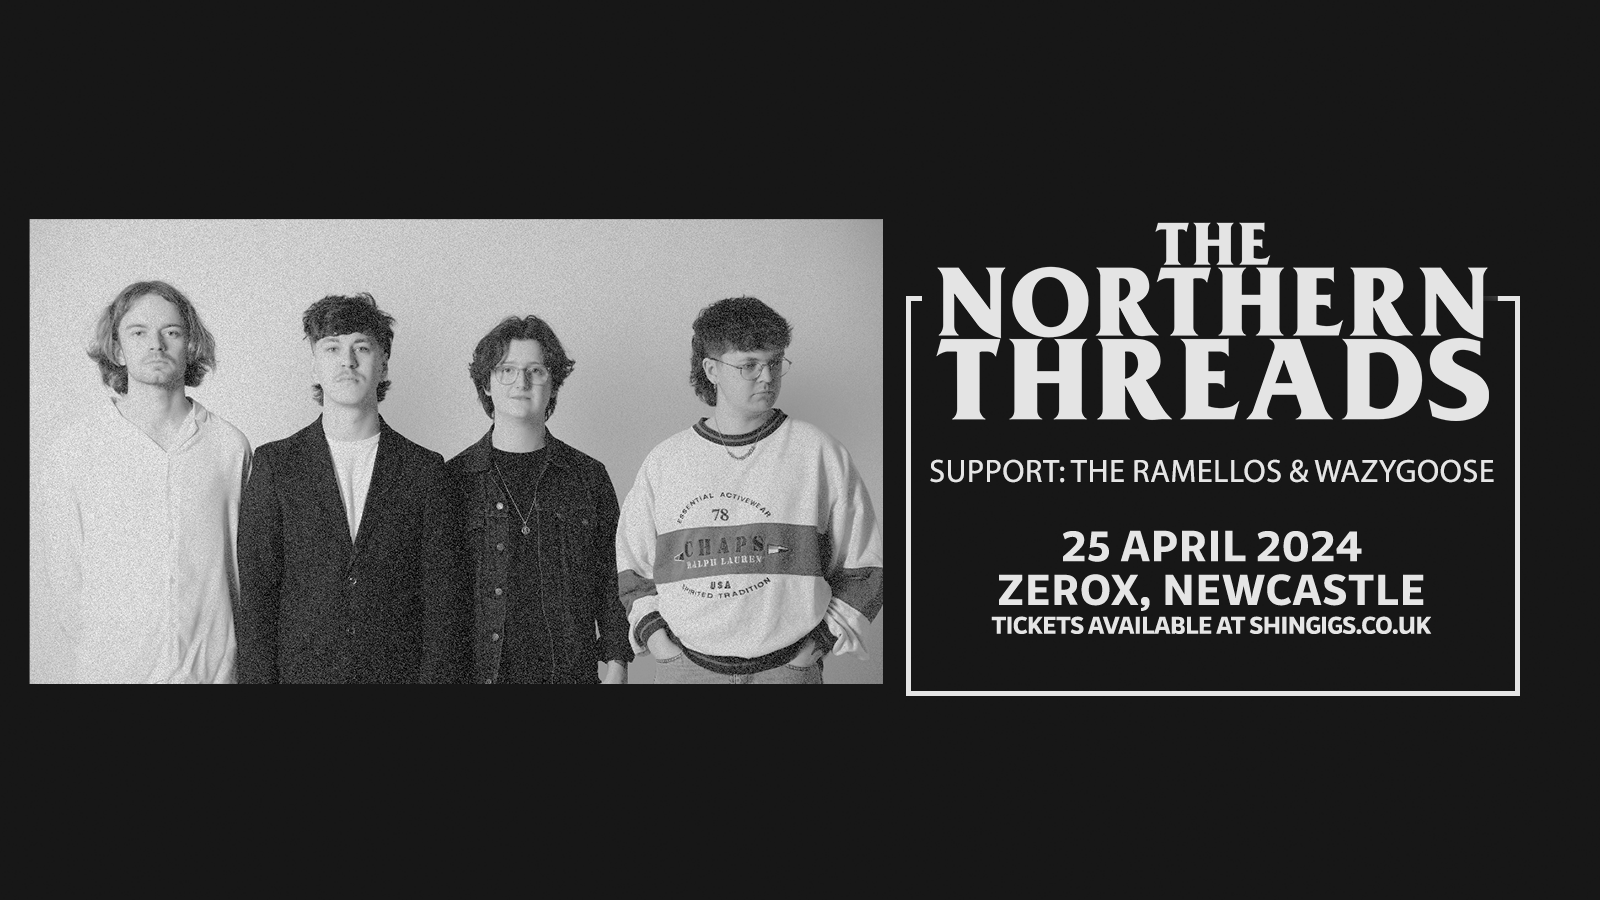 The Northern Threads + The Ramellos & Wazygoose